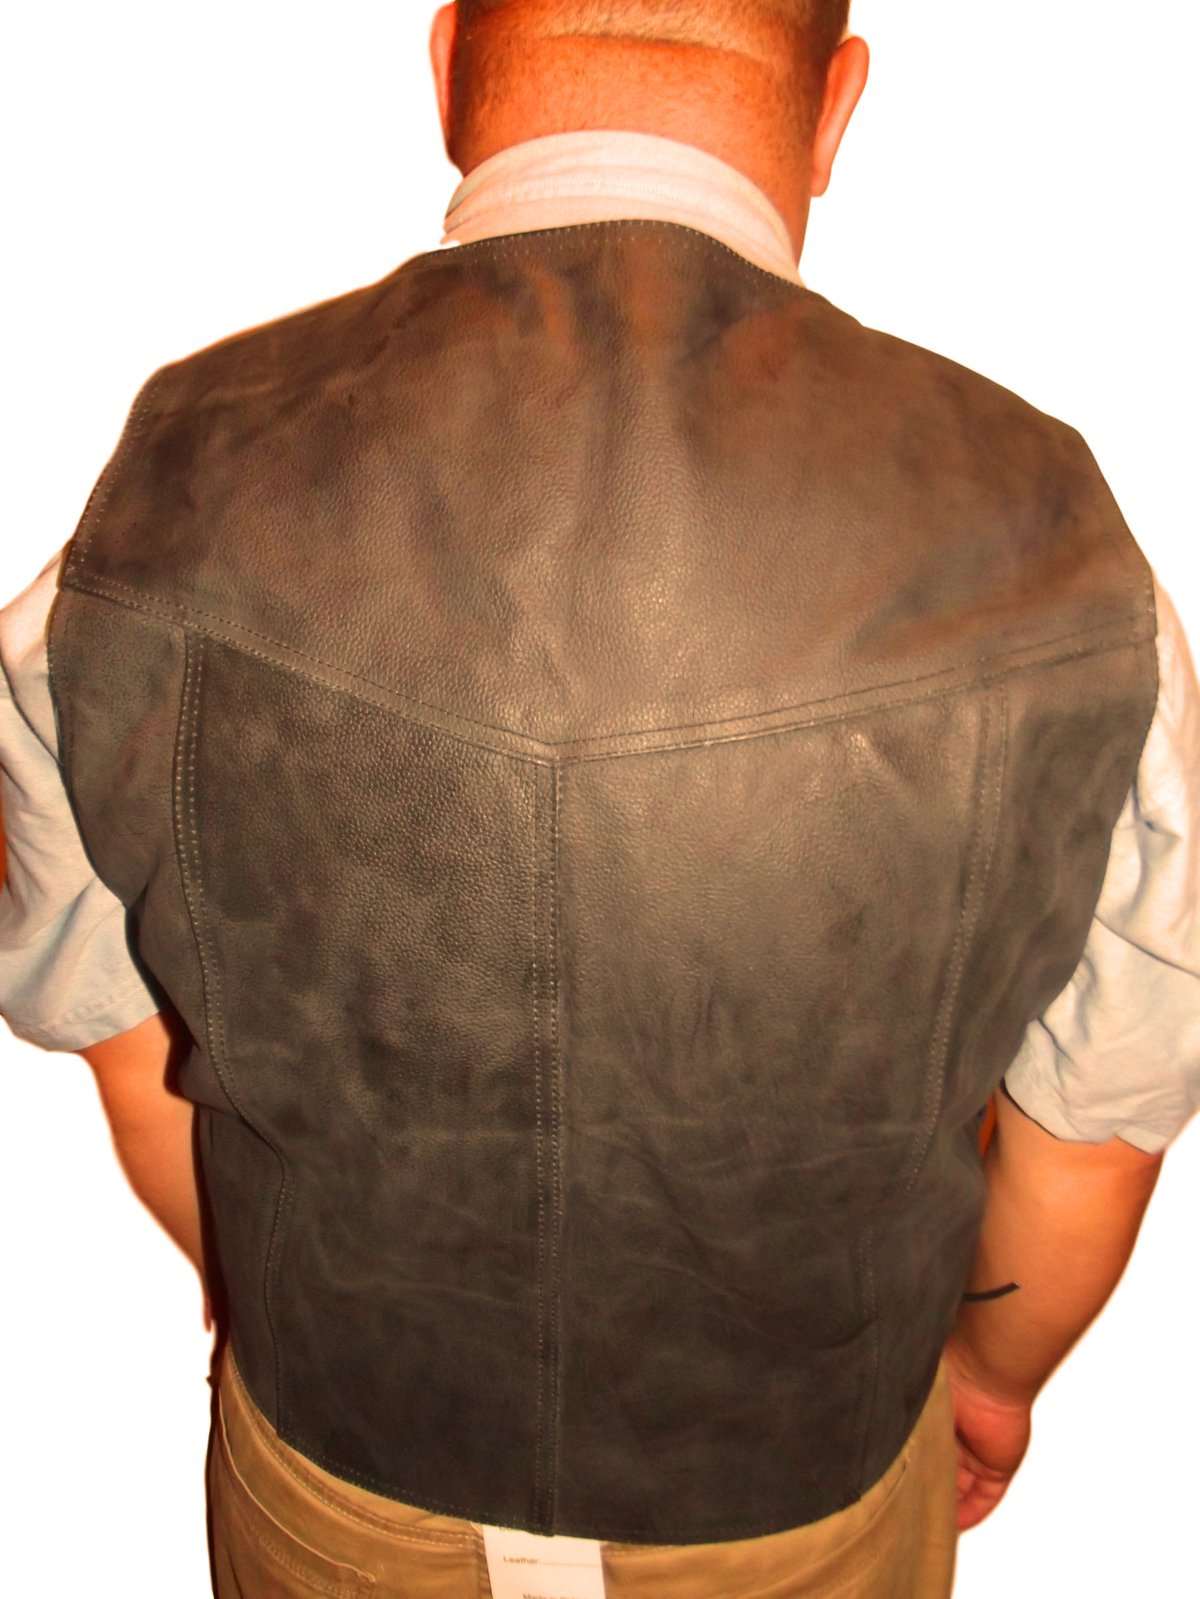 CD D C Mens Motorcycle Biker Leather Vest Traditional Style Cowhide Size 48